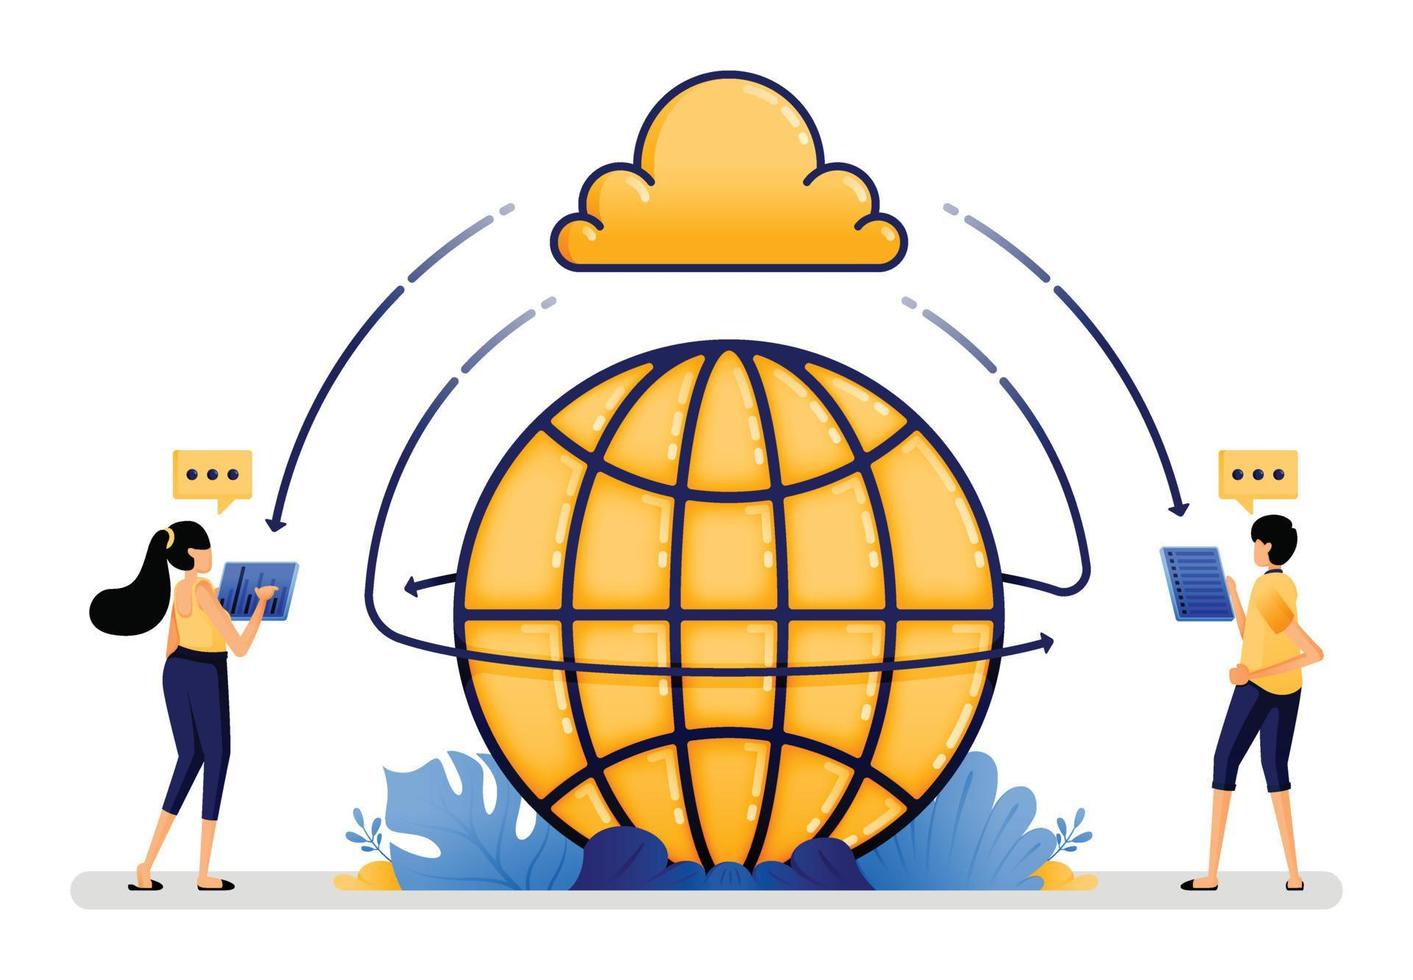 vector illustration of facilitate communication and internet network access with cloud technology. mobile cloud network is more efficient and secure. Designed for website, web, apps, poster, banner